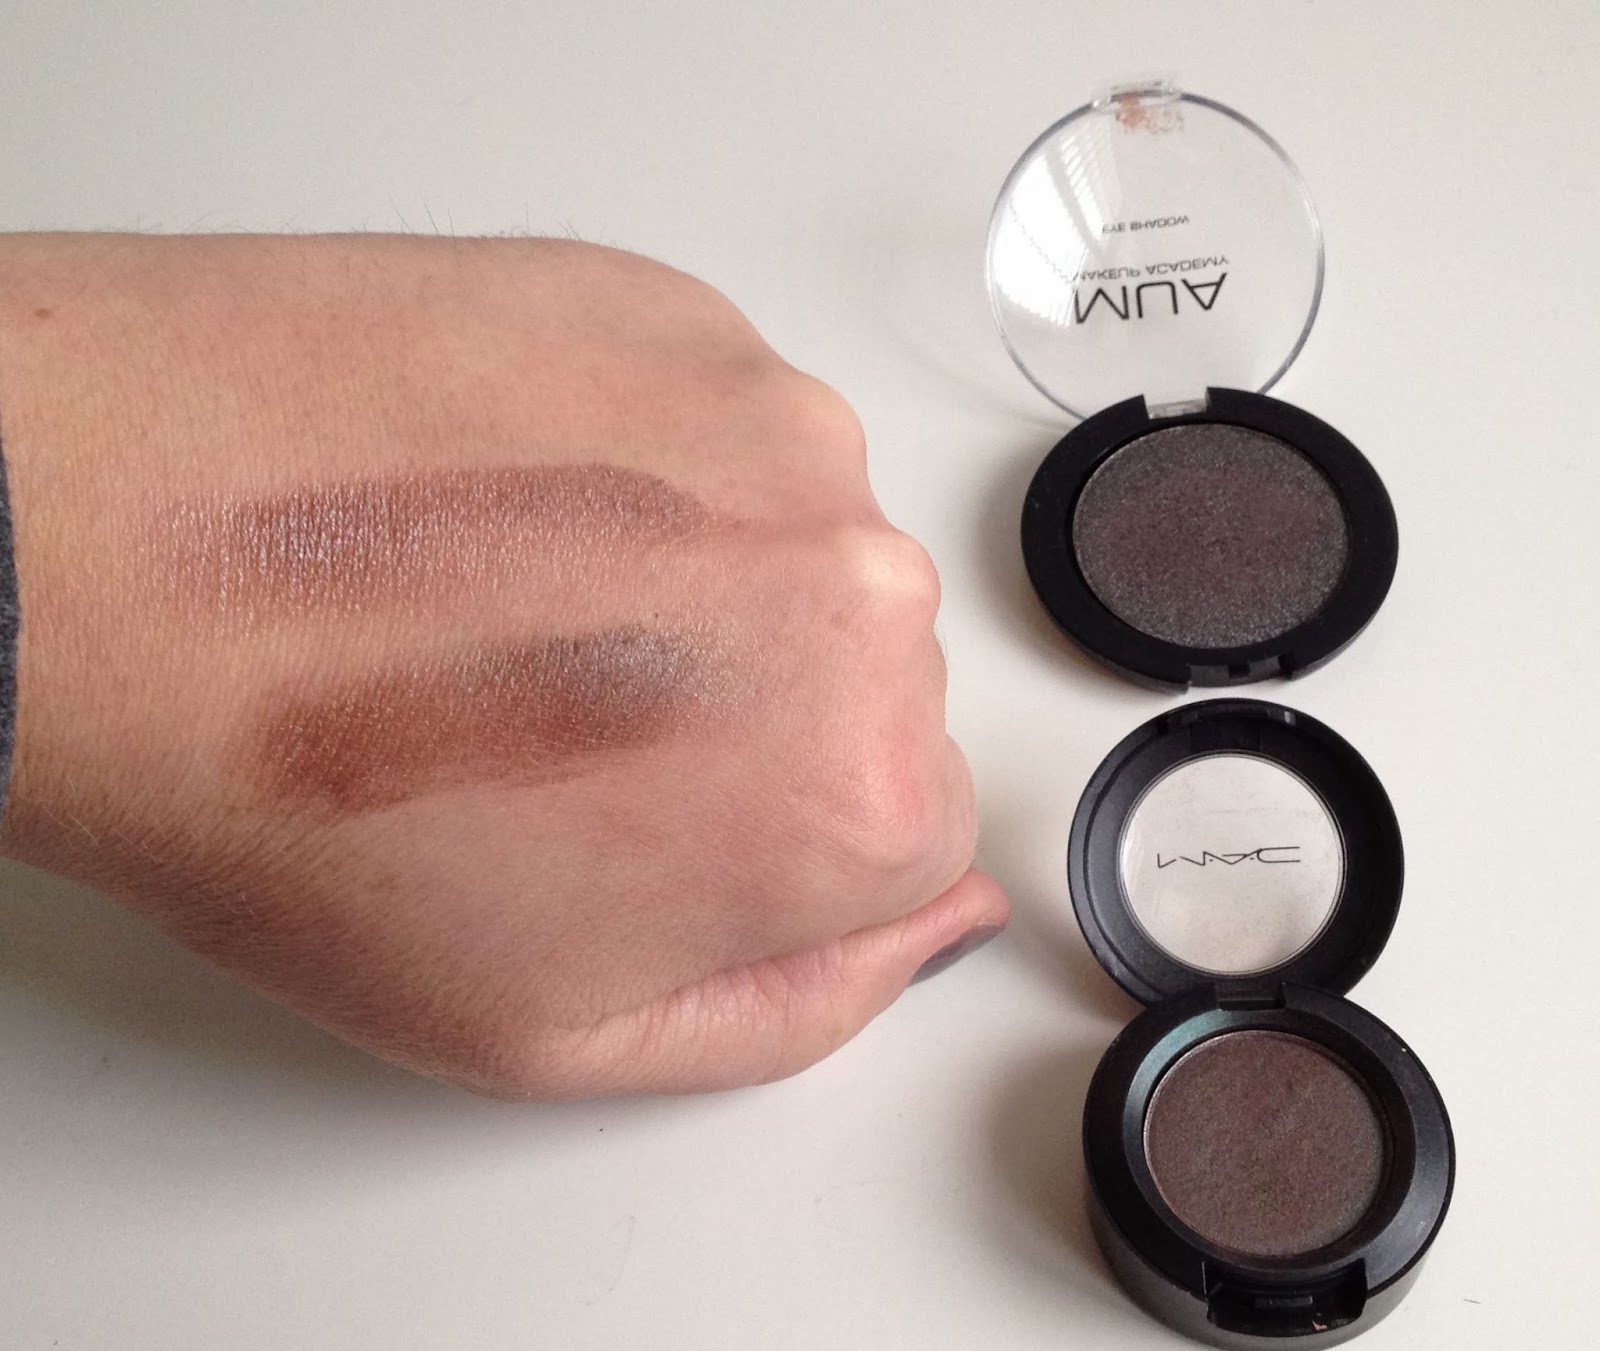 MUA Eyeshadow shade 12 a dupe for MAC Club swatches with duo chrome effect.